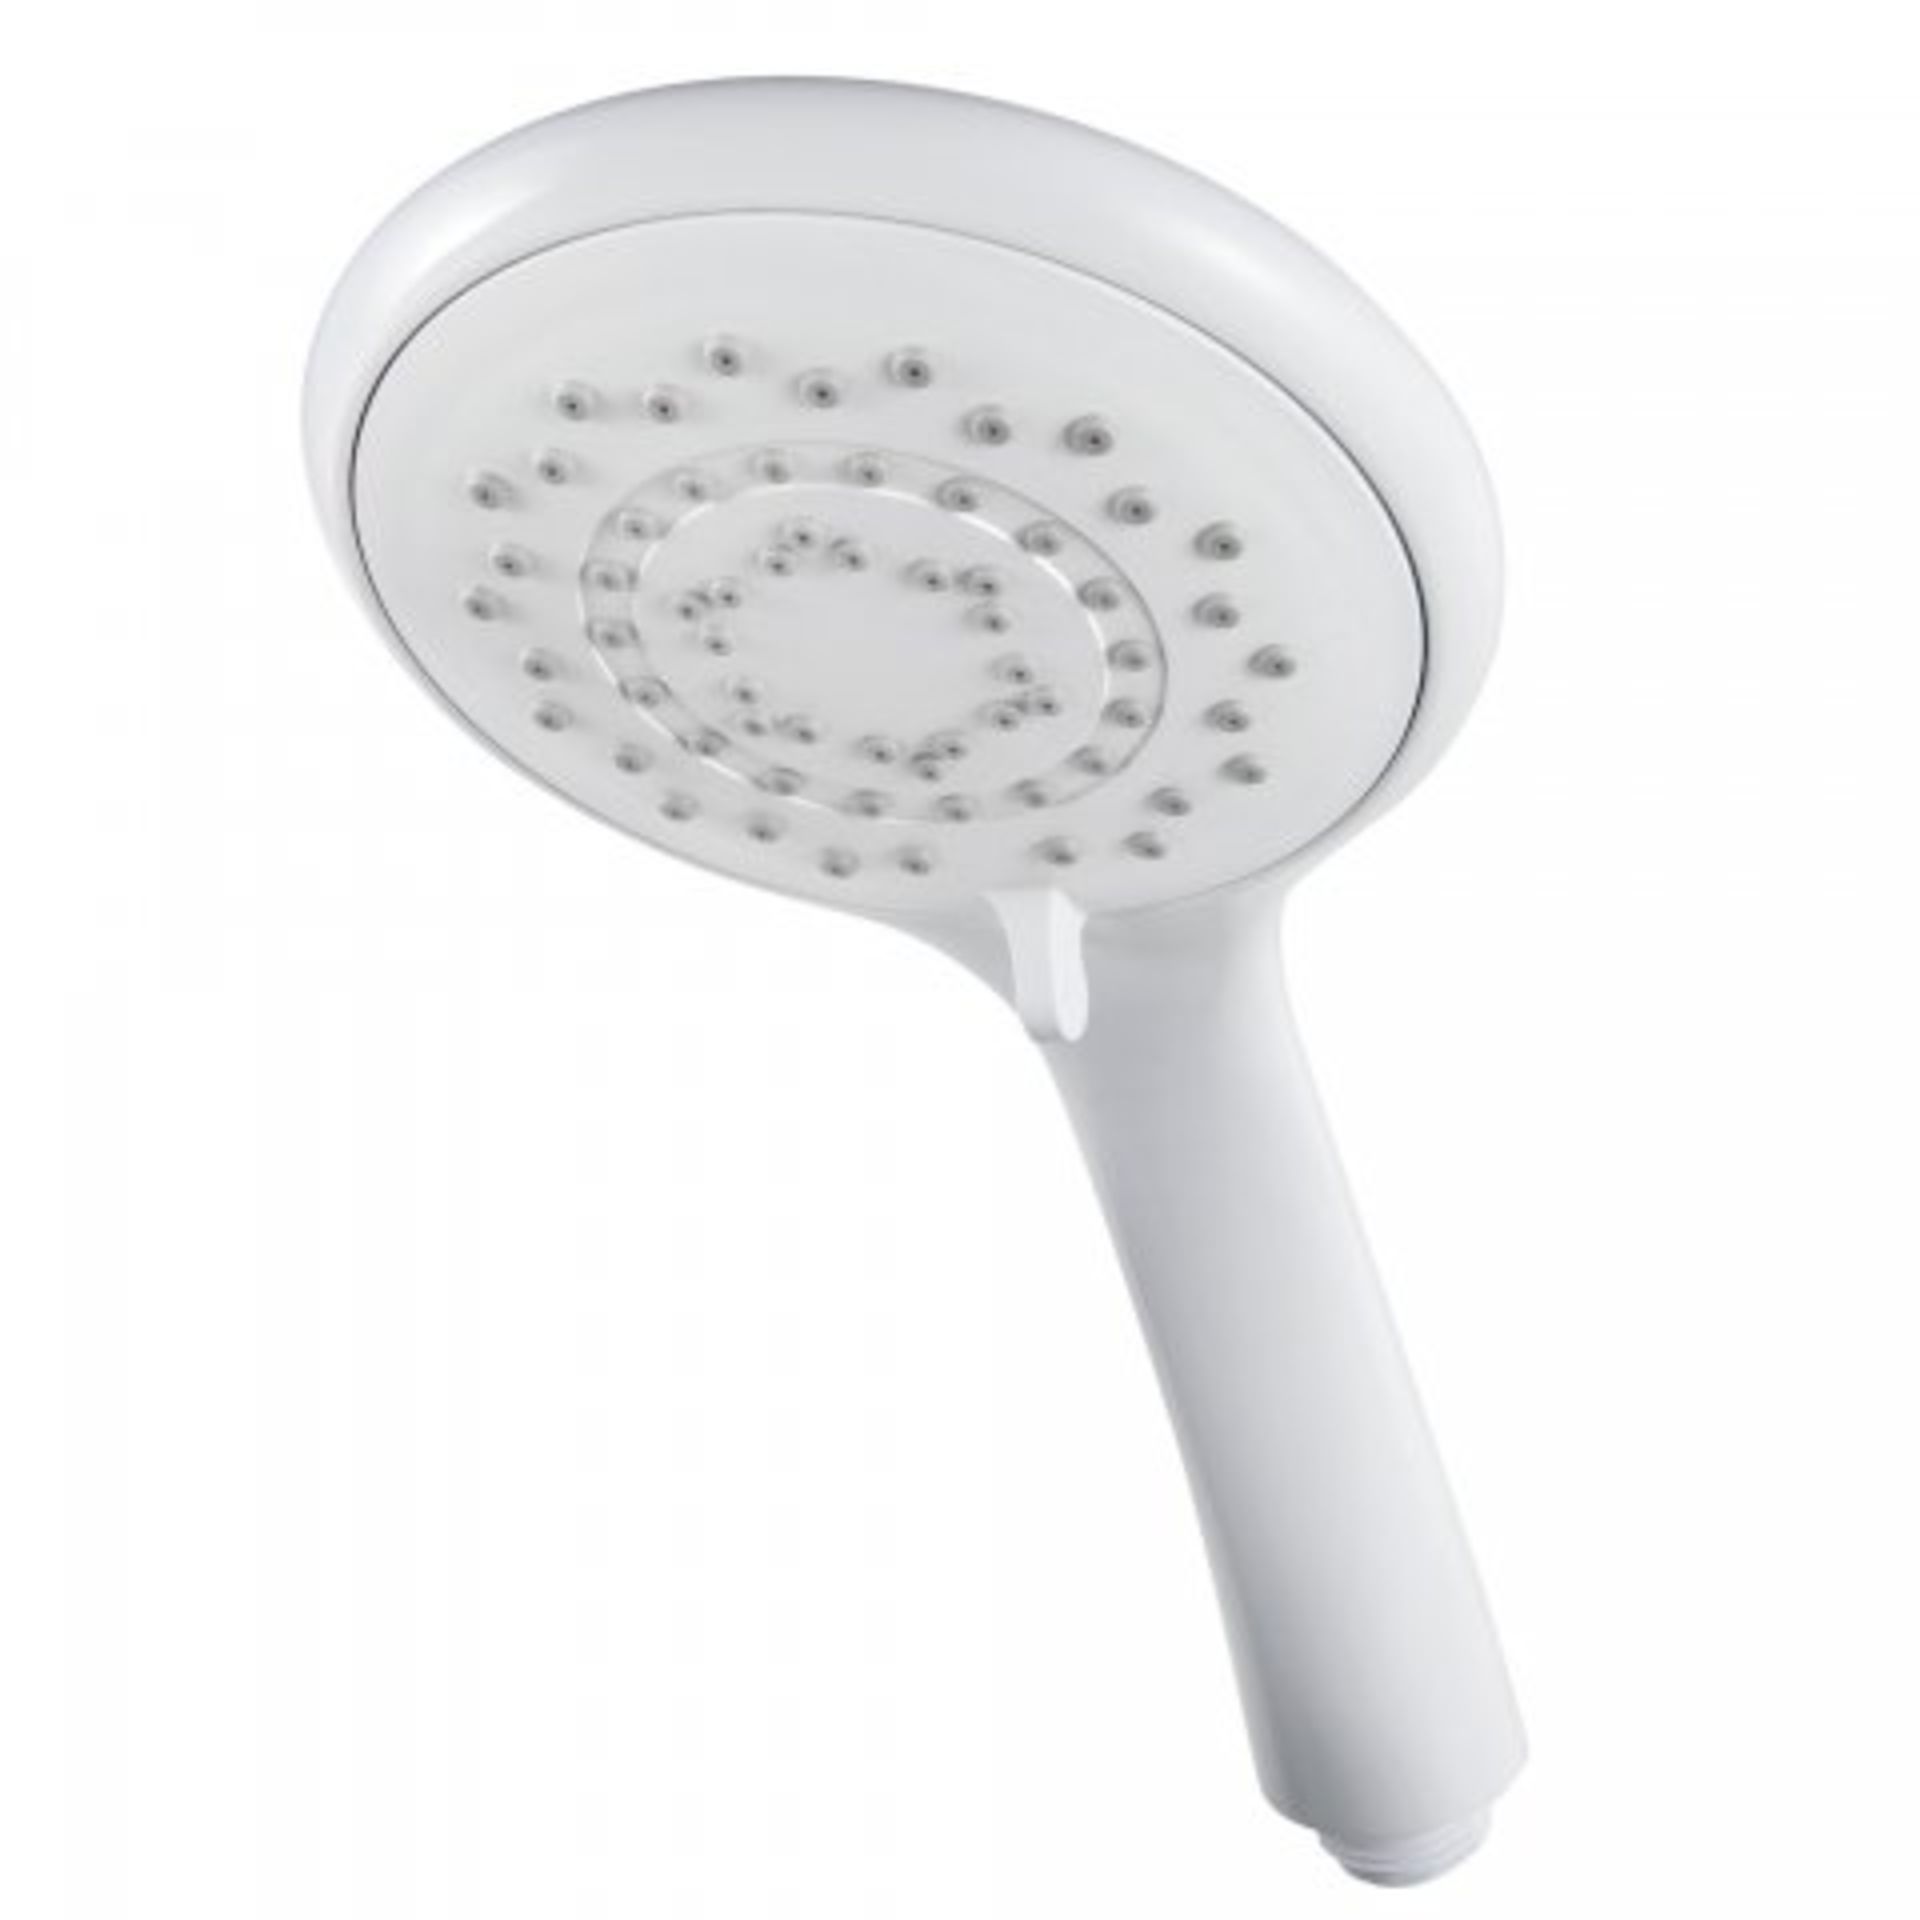 (AA46) Triton AS2000XT Thermostatic Power Shower - White. RRP £299.99. These sleek showers are - Image 3 of 3